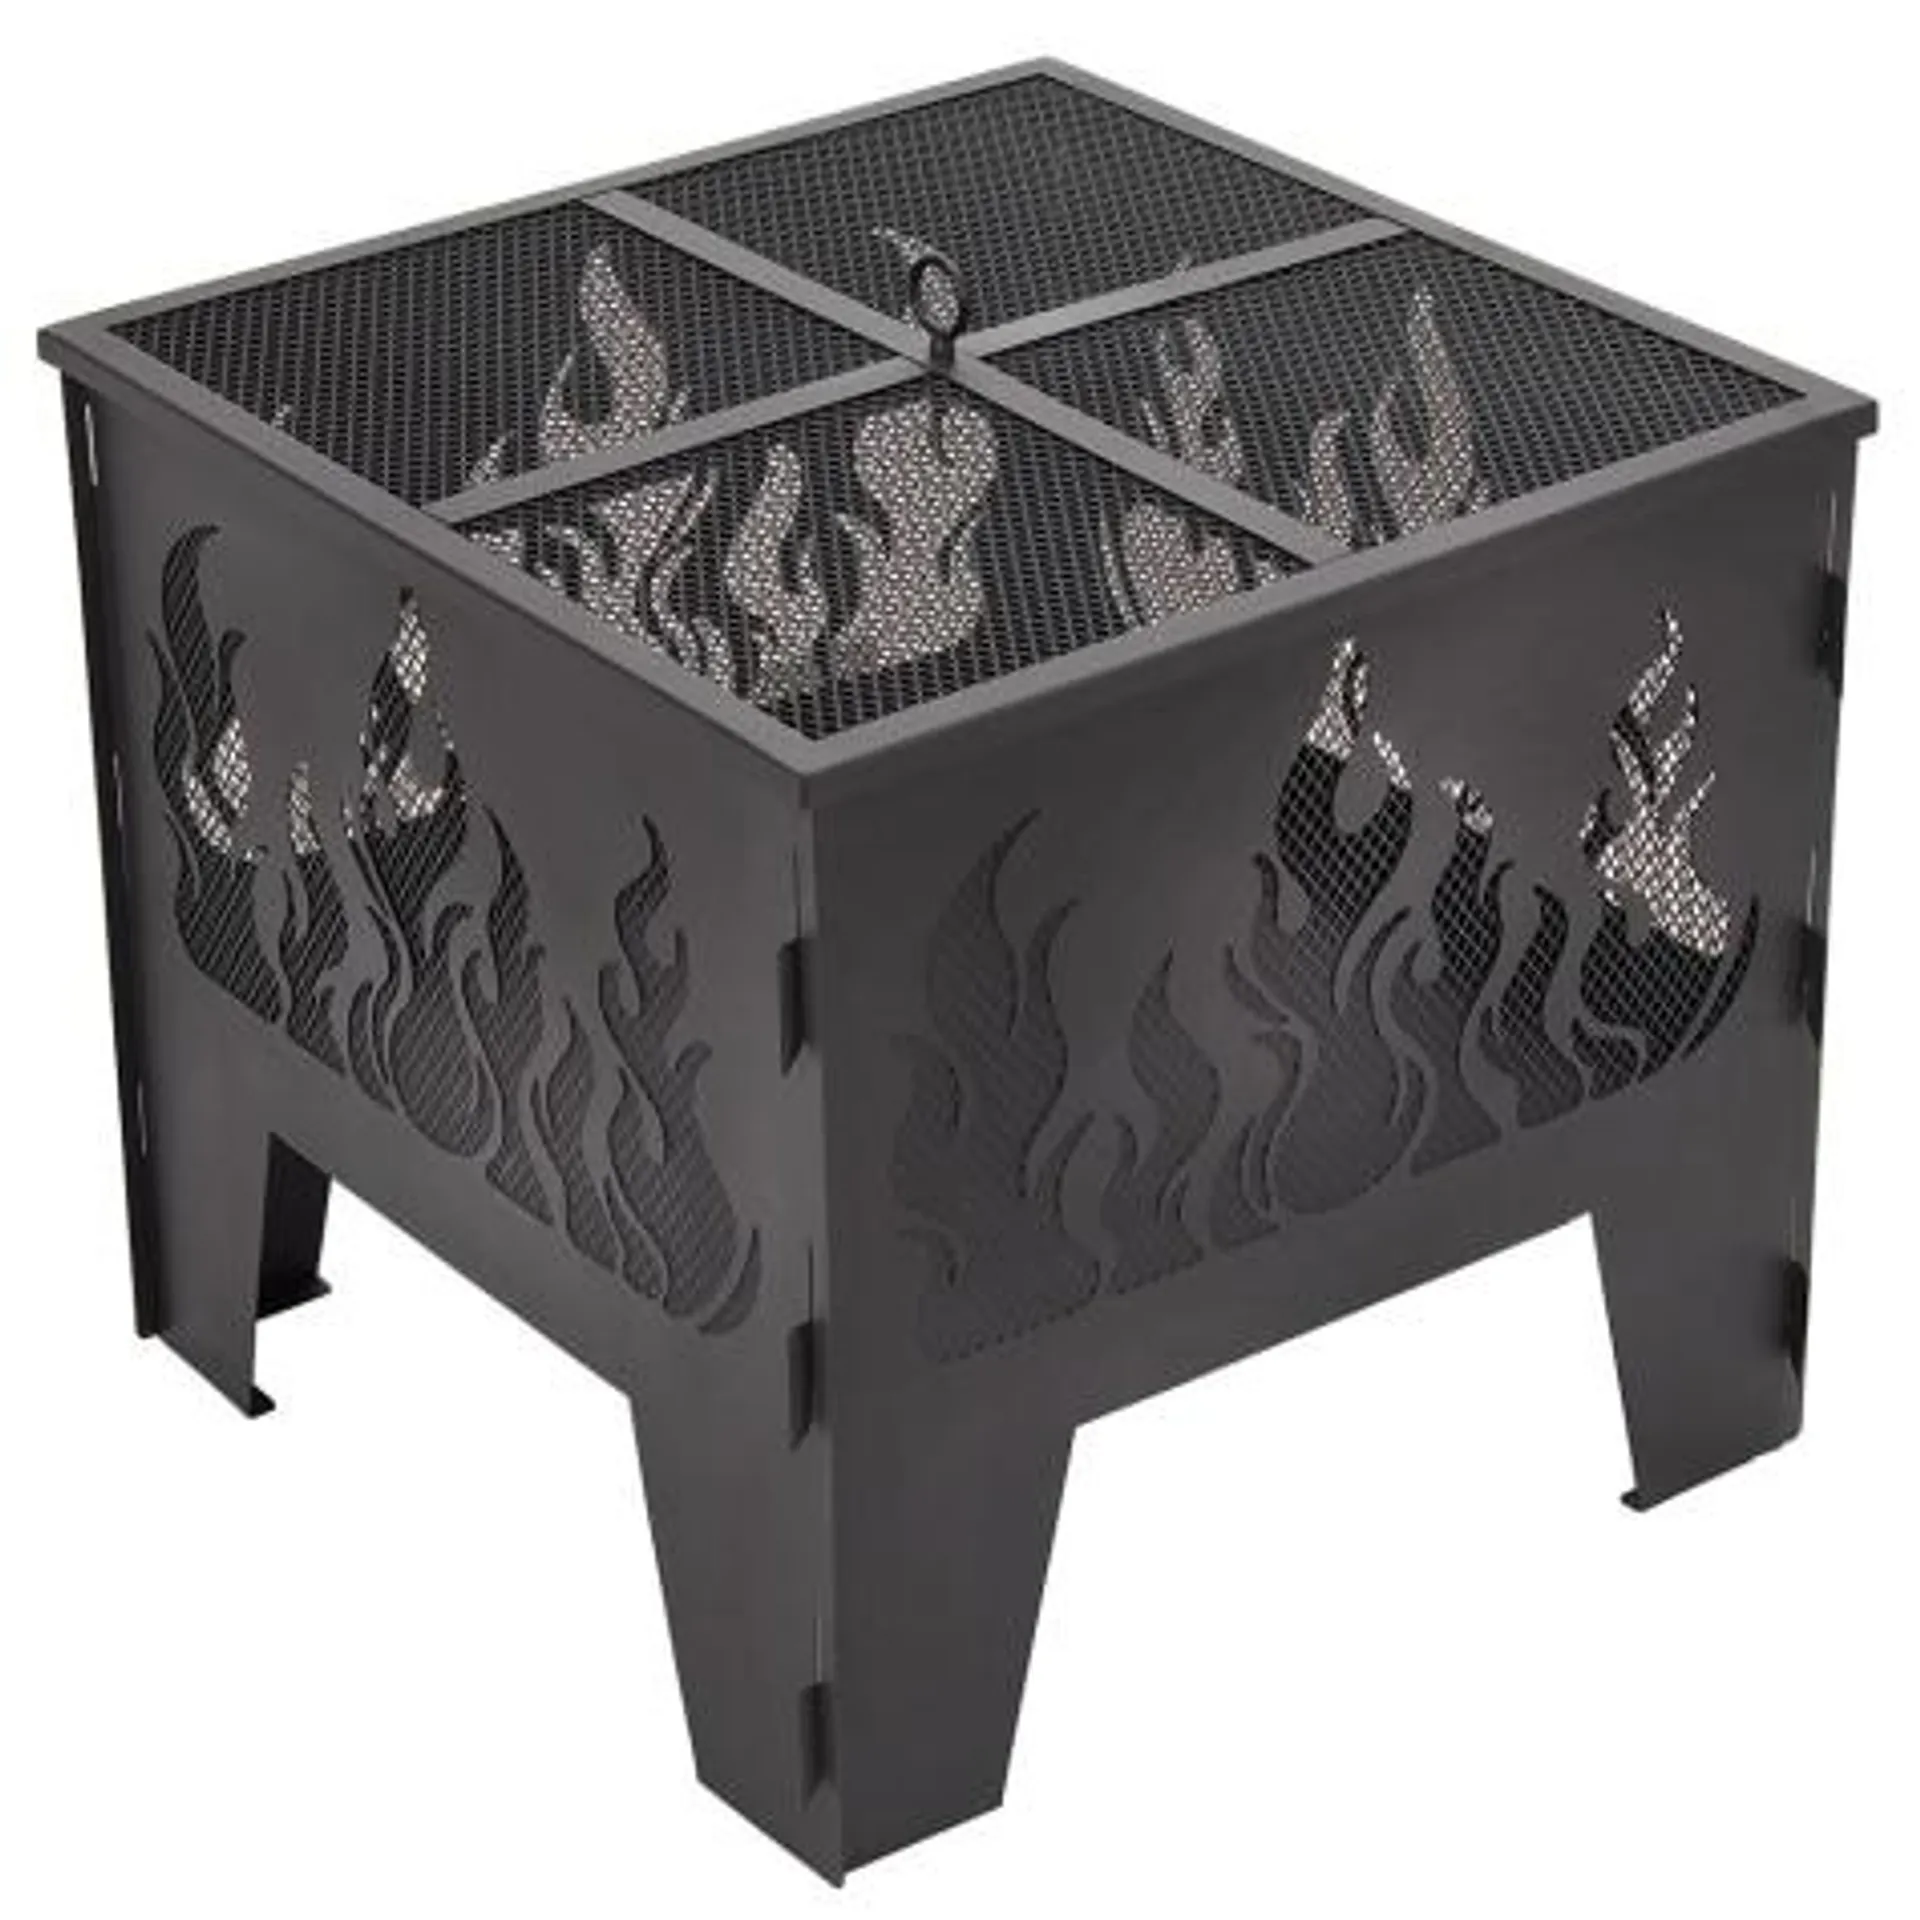 Outdoor Living Accents Square Fire Pit with Wild Fire Cutout Design, 20"